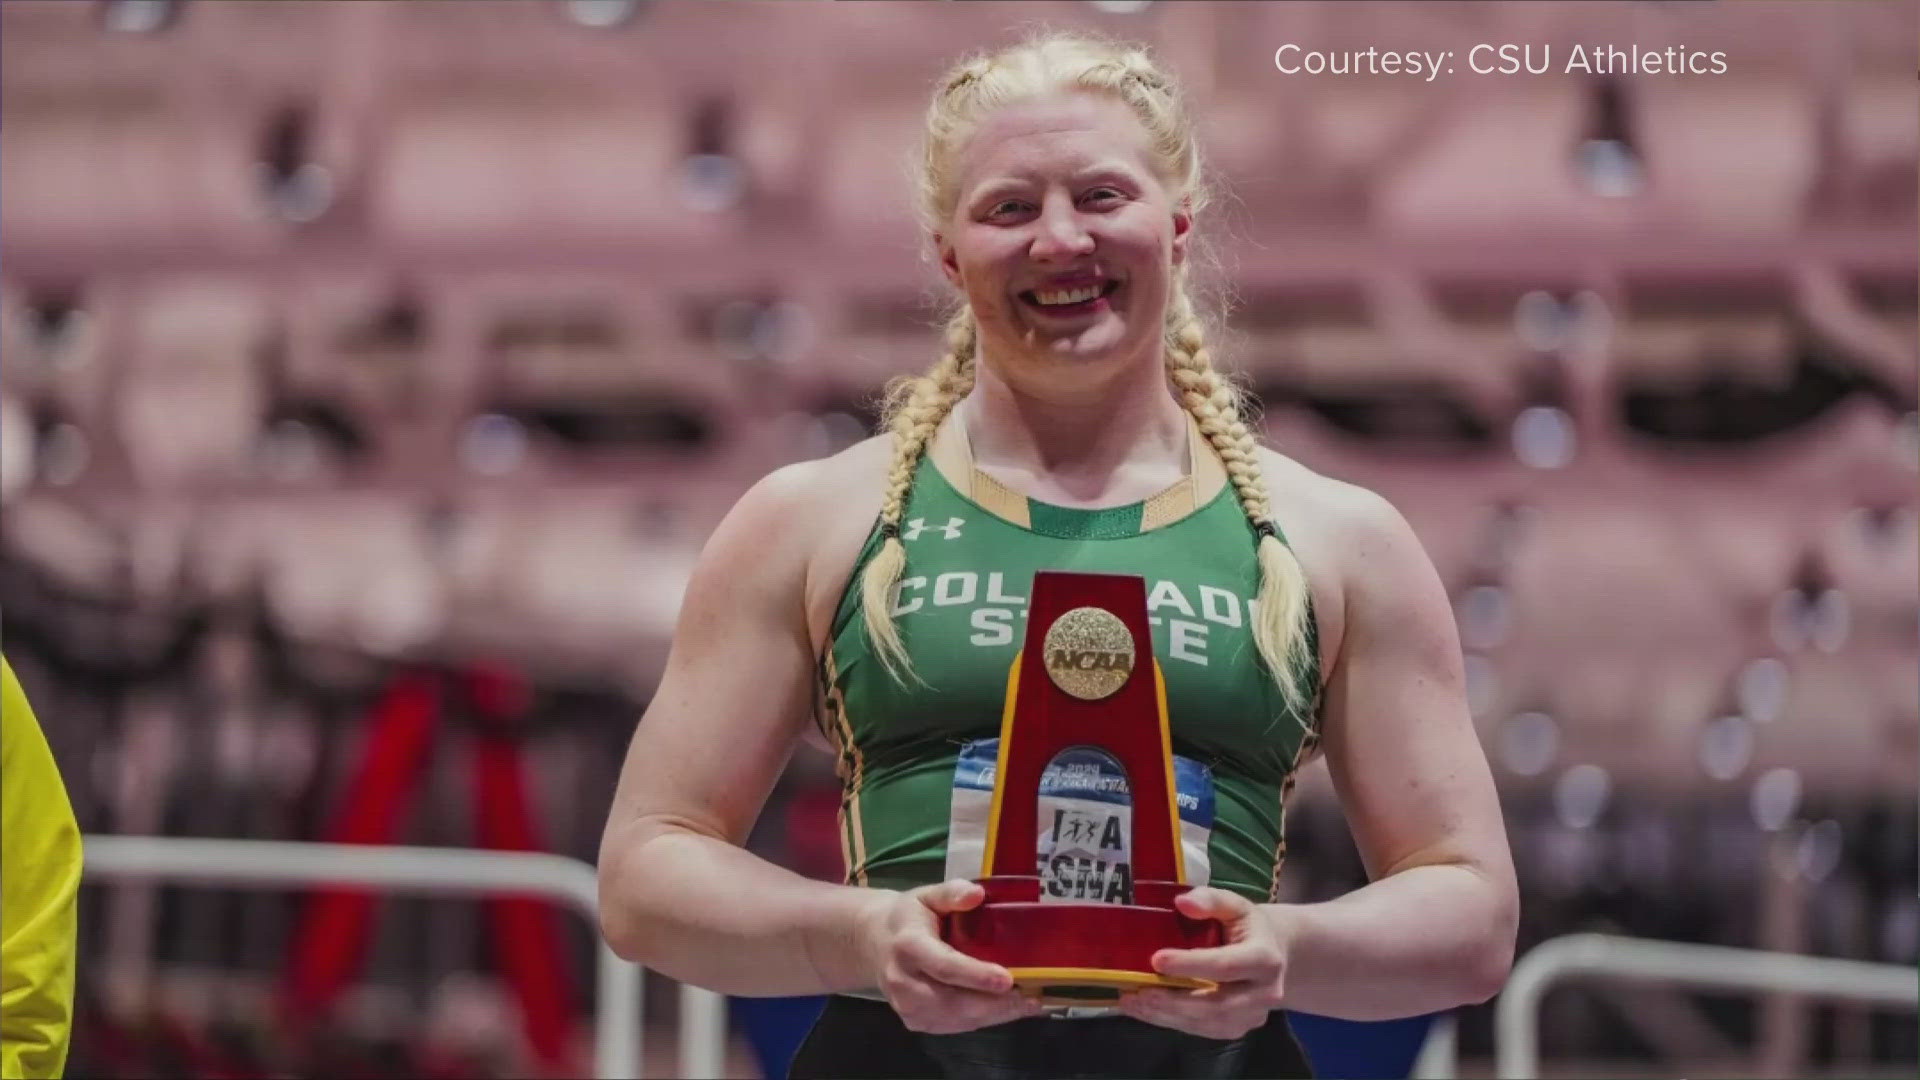 Mya Lesnar is the first women's indoor track and field national champion in Colorado State history.